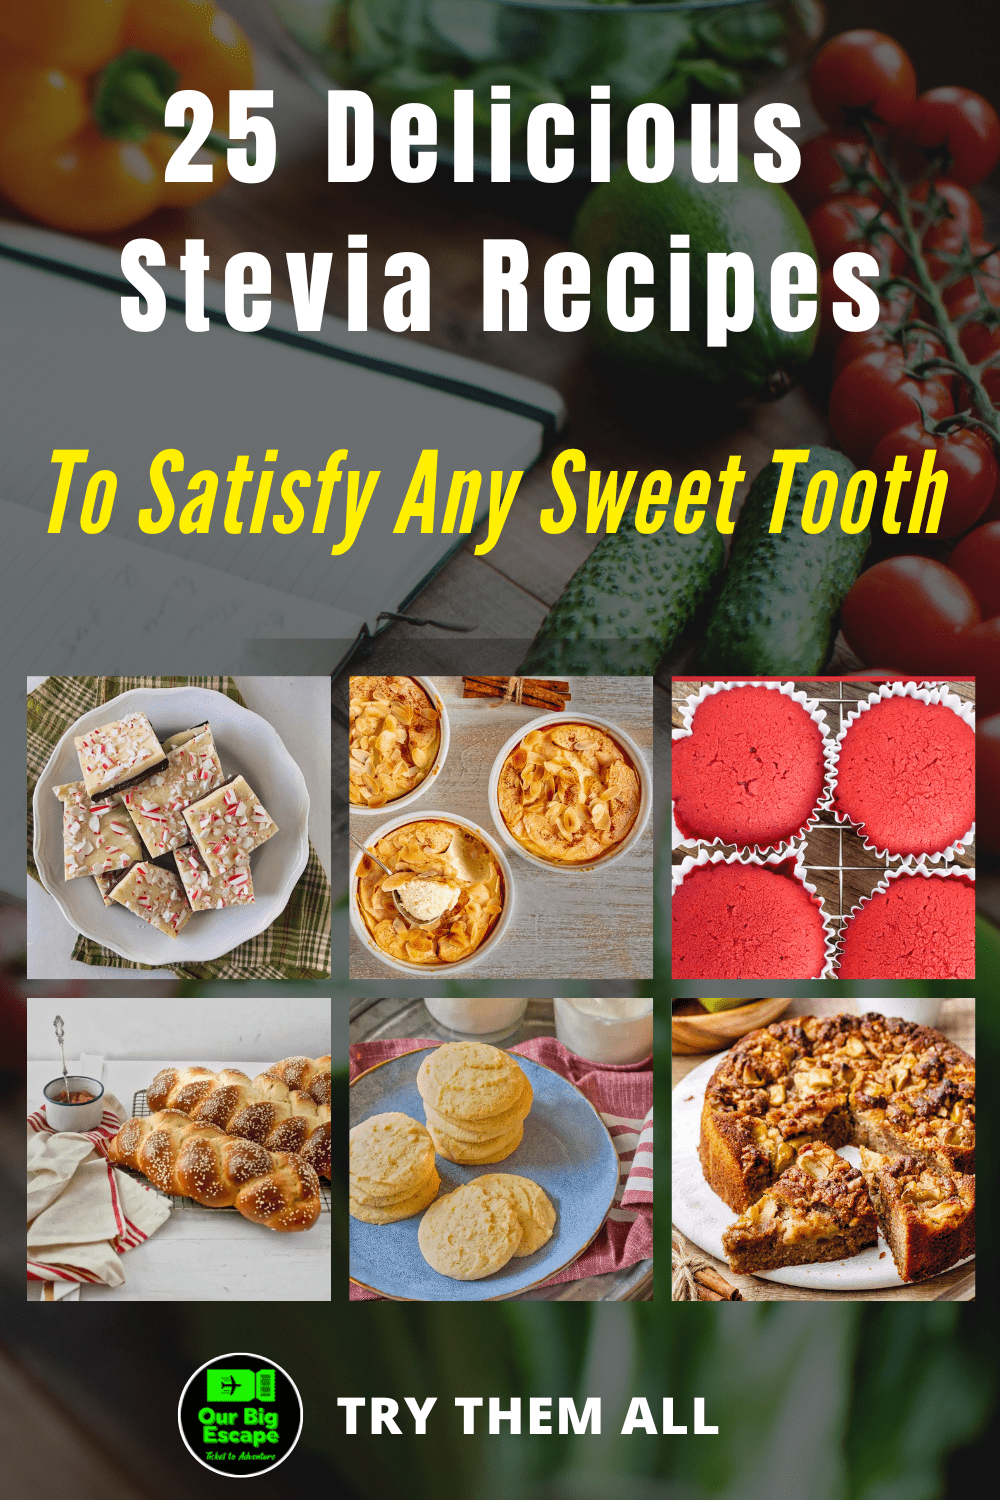 25 Delicious Stevia Recipes To Satisfy Any Sweet Tooth